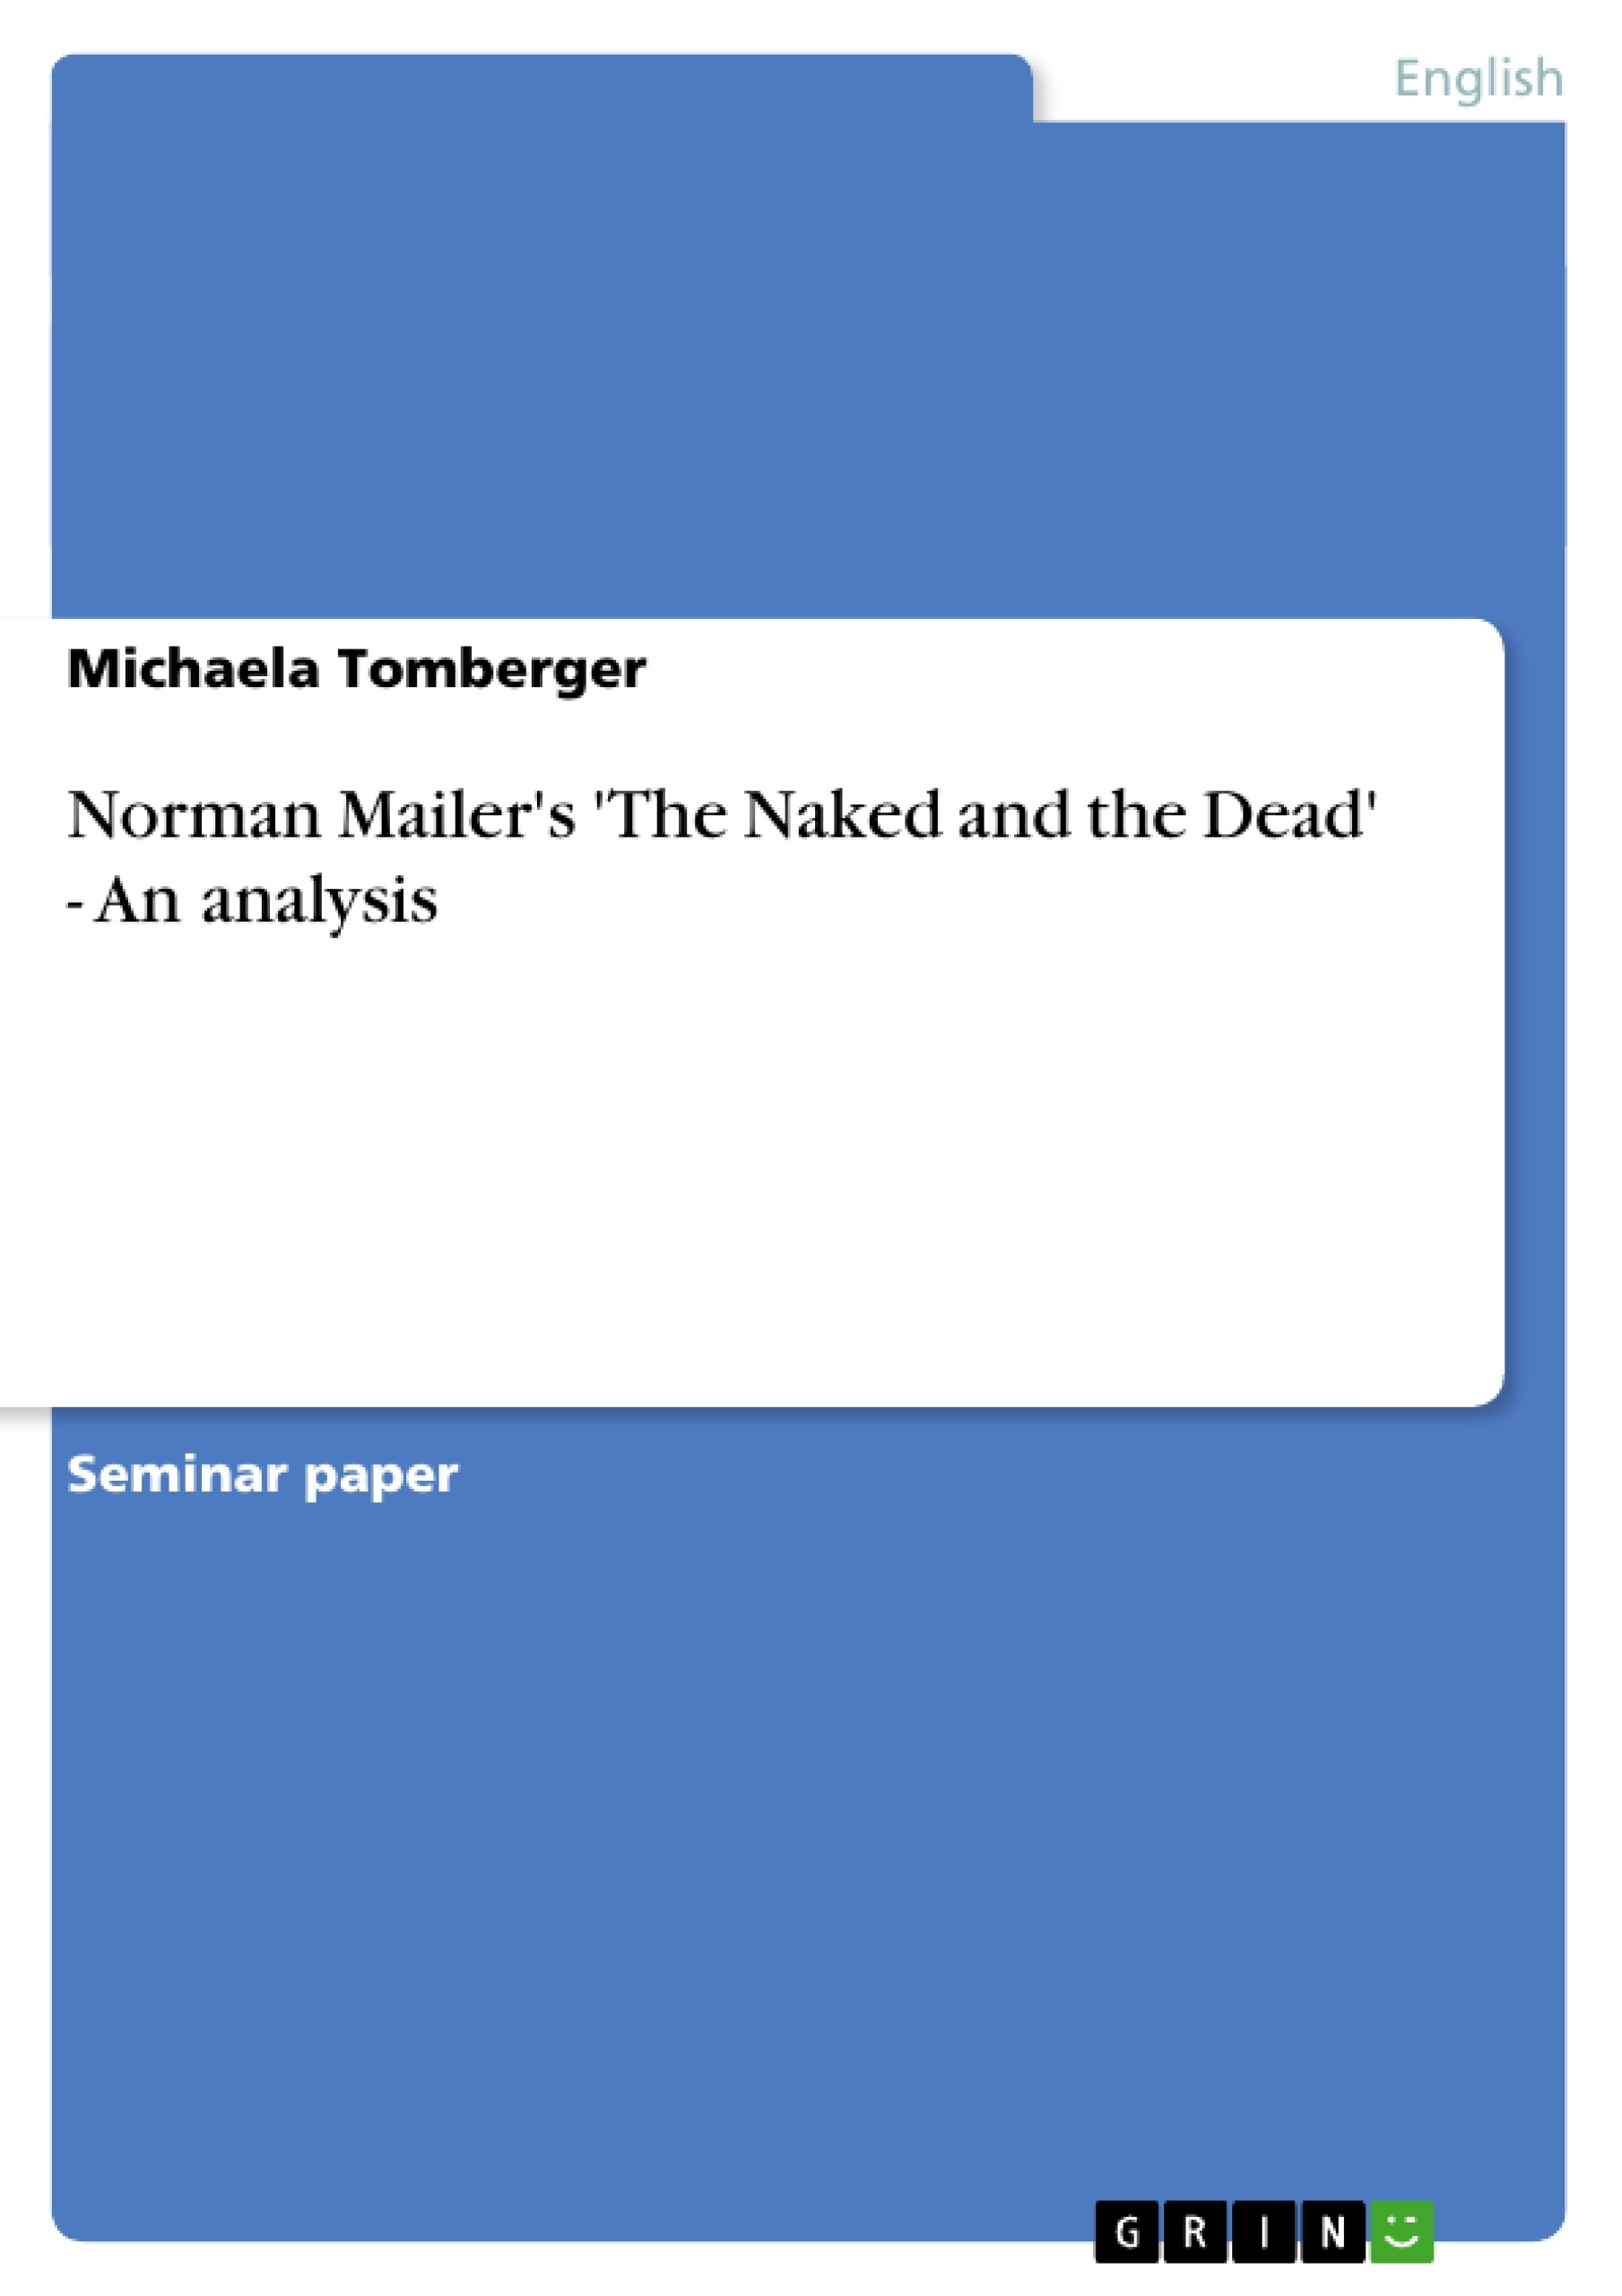 Snazz reccomend The naked and the dead miler